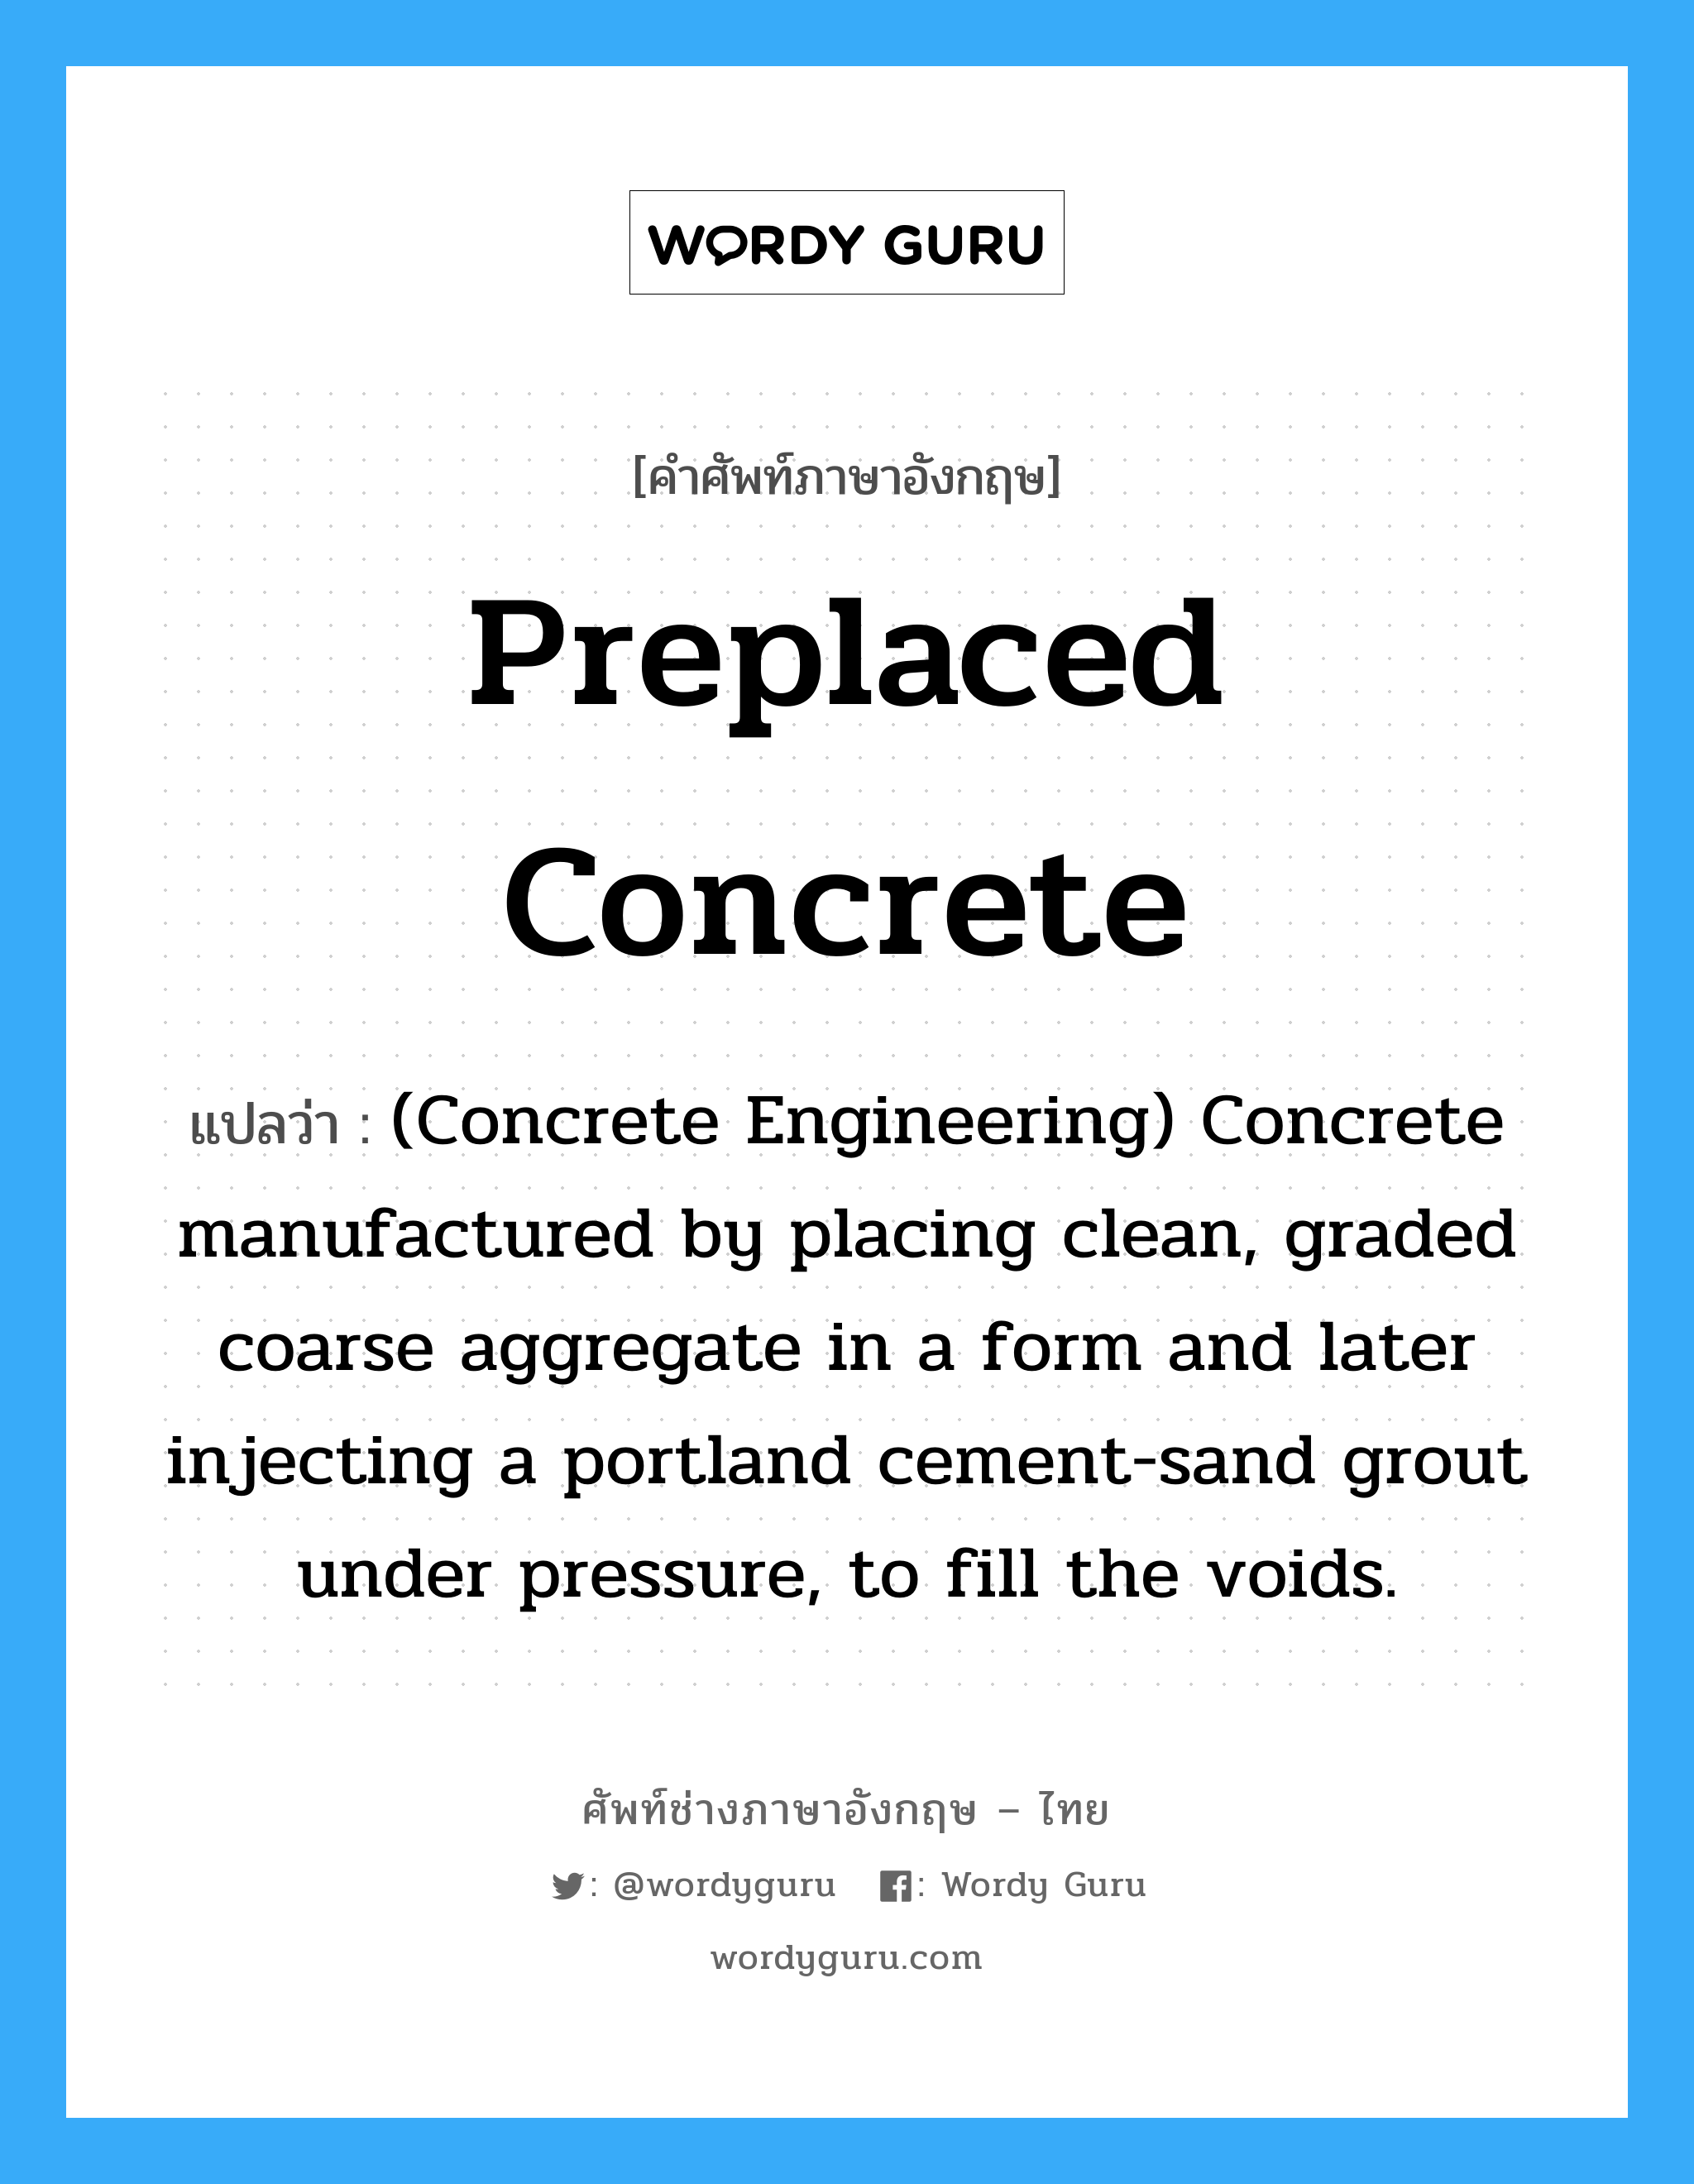 Preplaced Concrete แปลว่า?, คำศัพท์ช่างภาษาอังกฤษ - ไทย Preplaced Concrete คำศัพท์ภาษาอังกฤษ Preplaced Concrete แปลว่า (Concrete Engineering) Concrete manufactured by placing clean, graded coarse aggregate in a form and later injecting a portland cement-sand grout under pressure, to fill the voids.